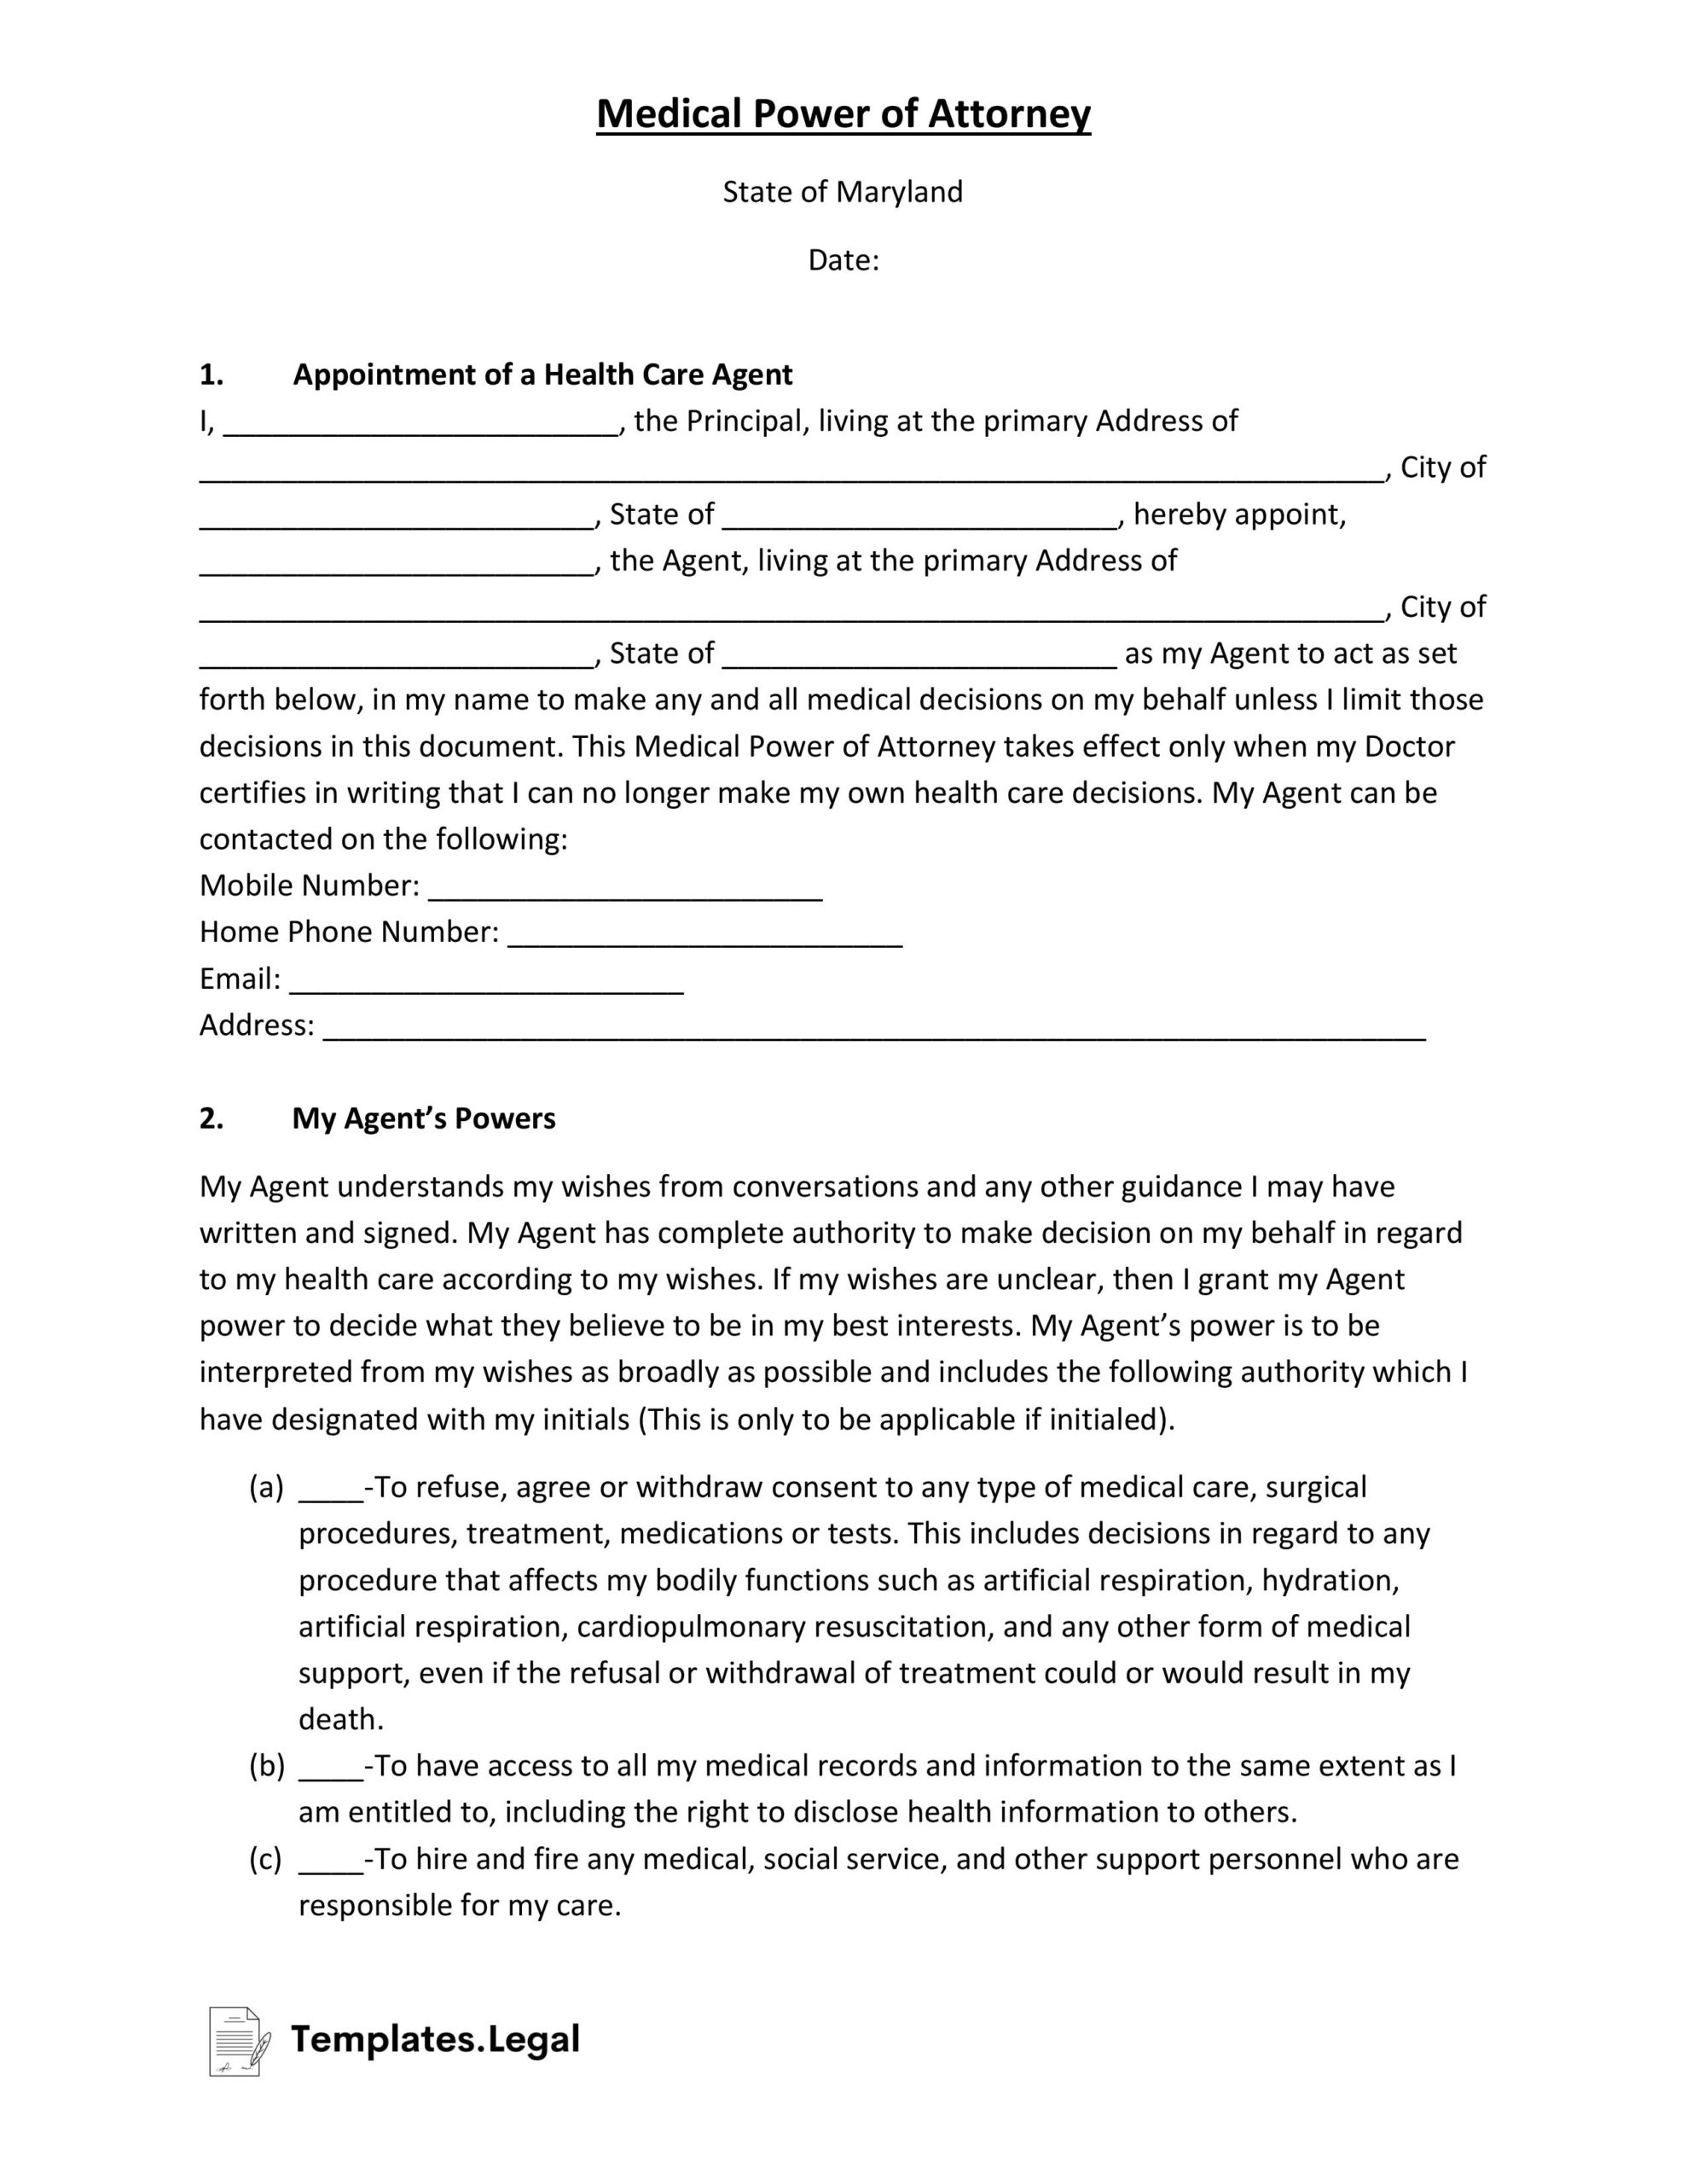 Maryland Medical Power of Attorney- Templates.Legal